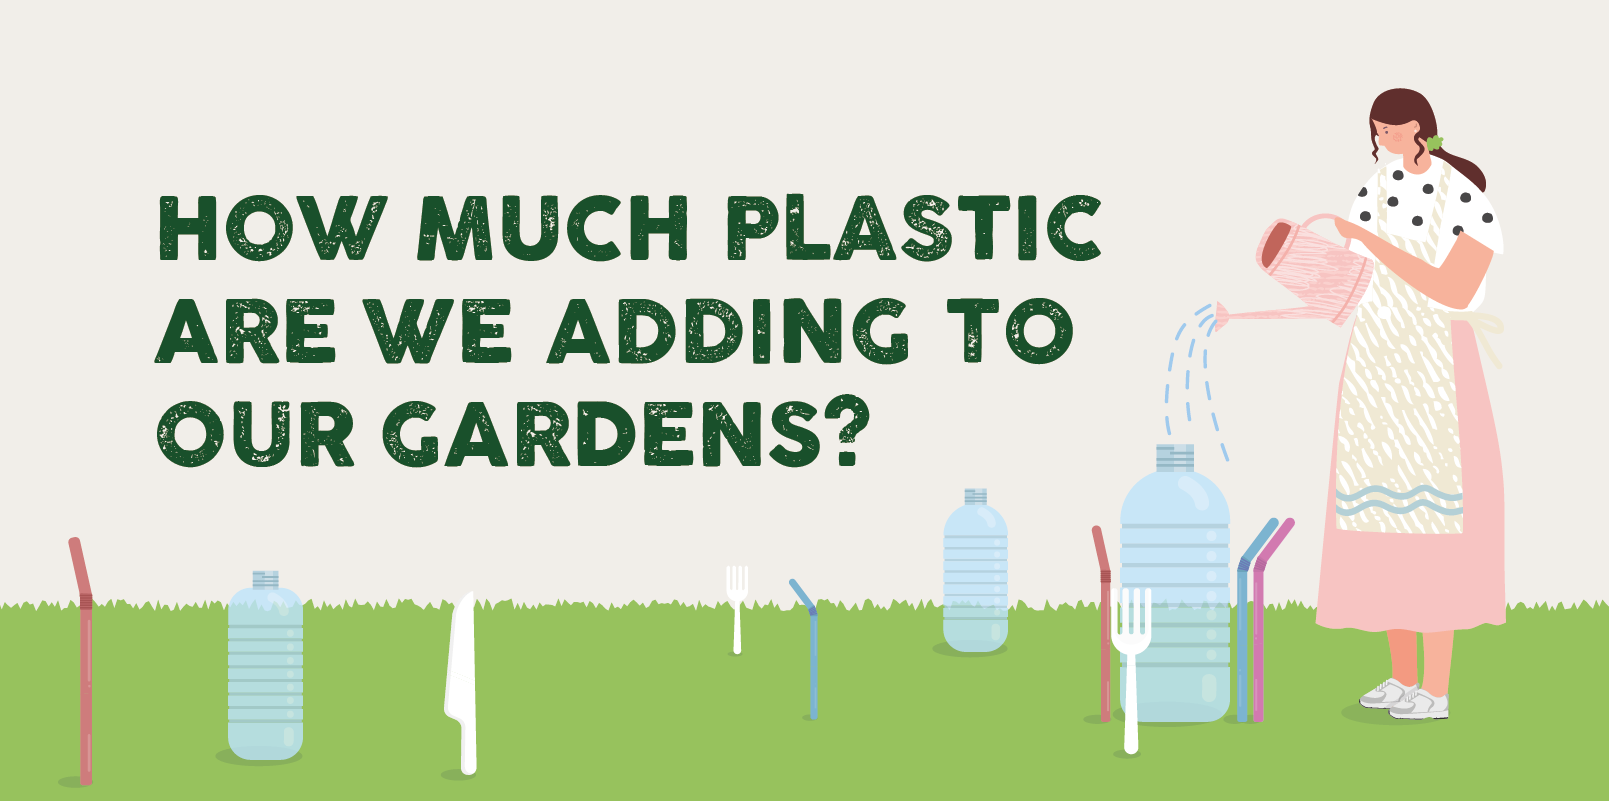 How much plastic are we adding to our gardens?